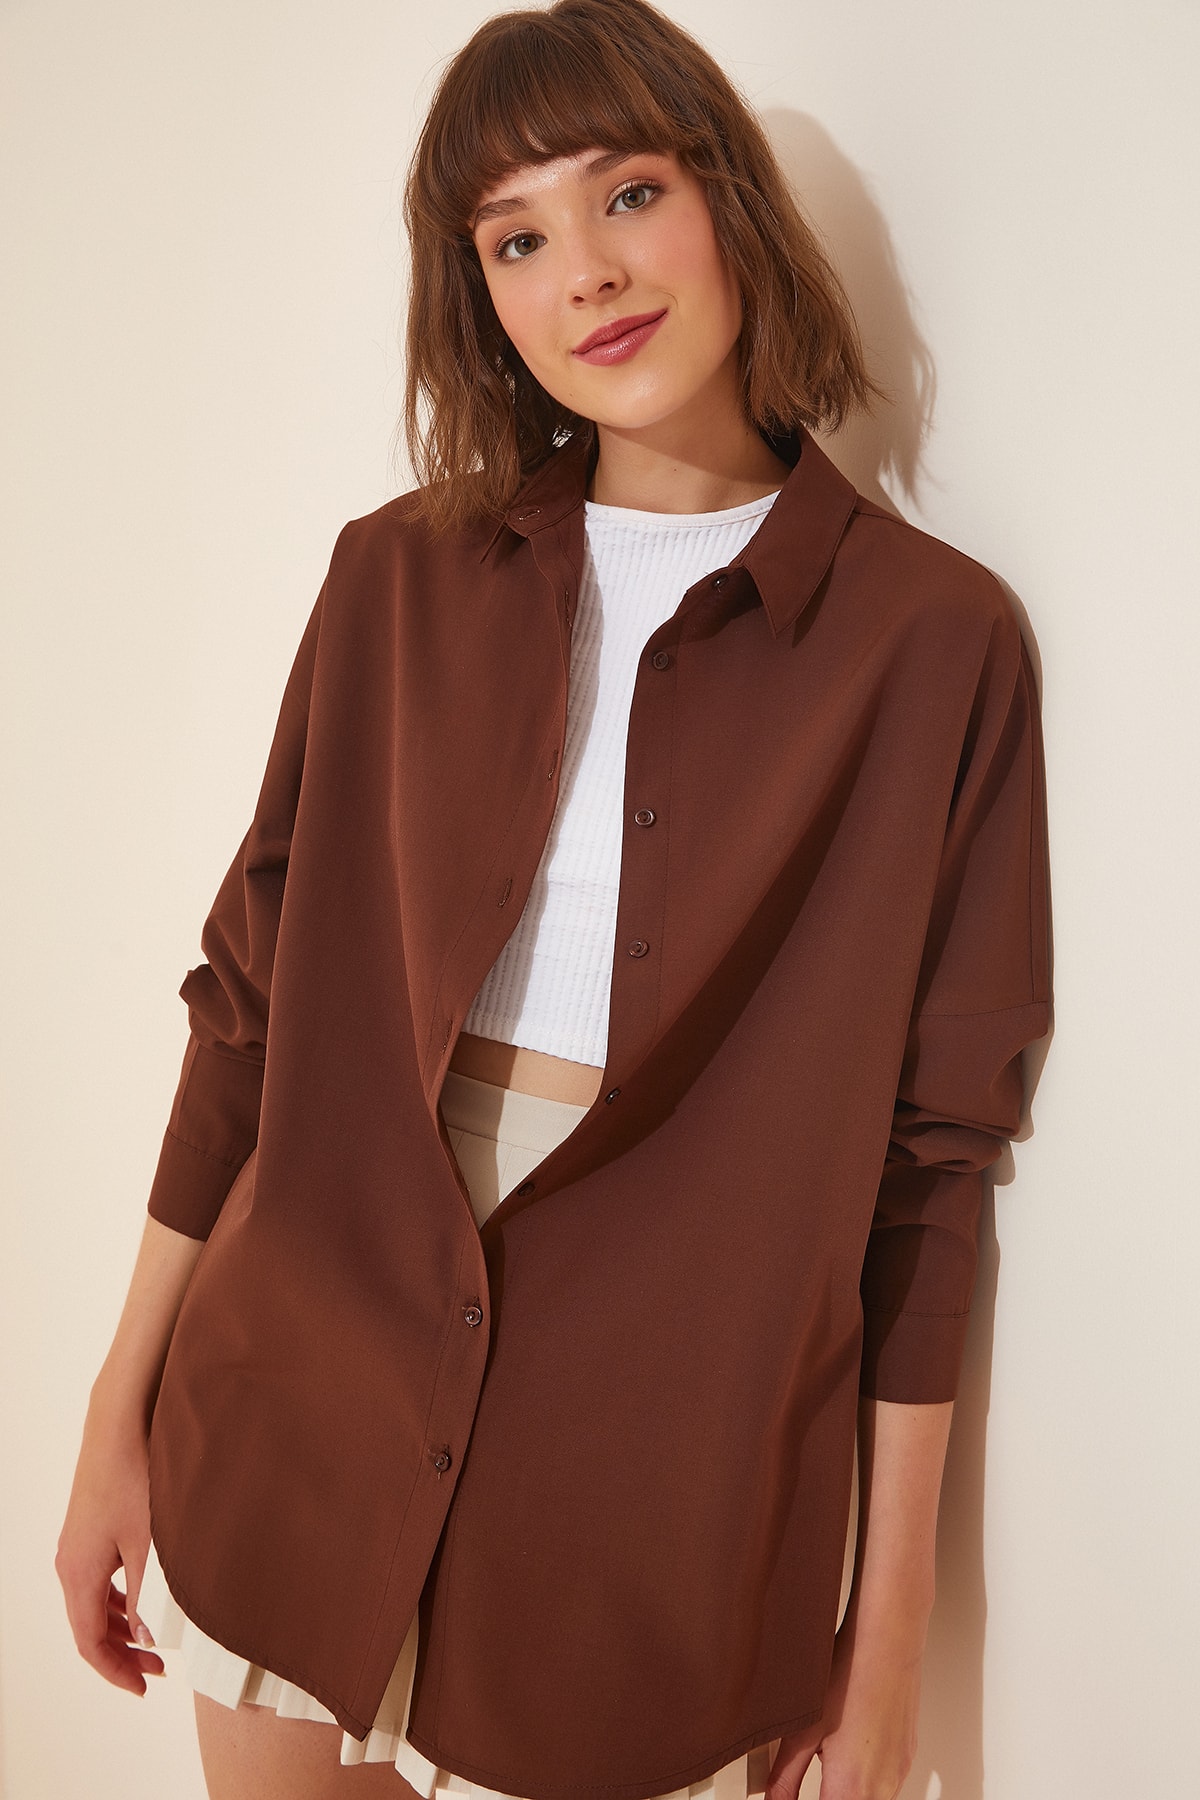 Happiness İstanbul Shirt - Brown - Oversize